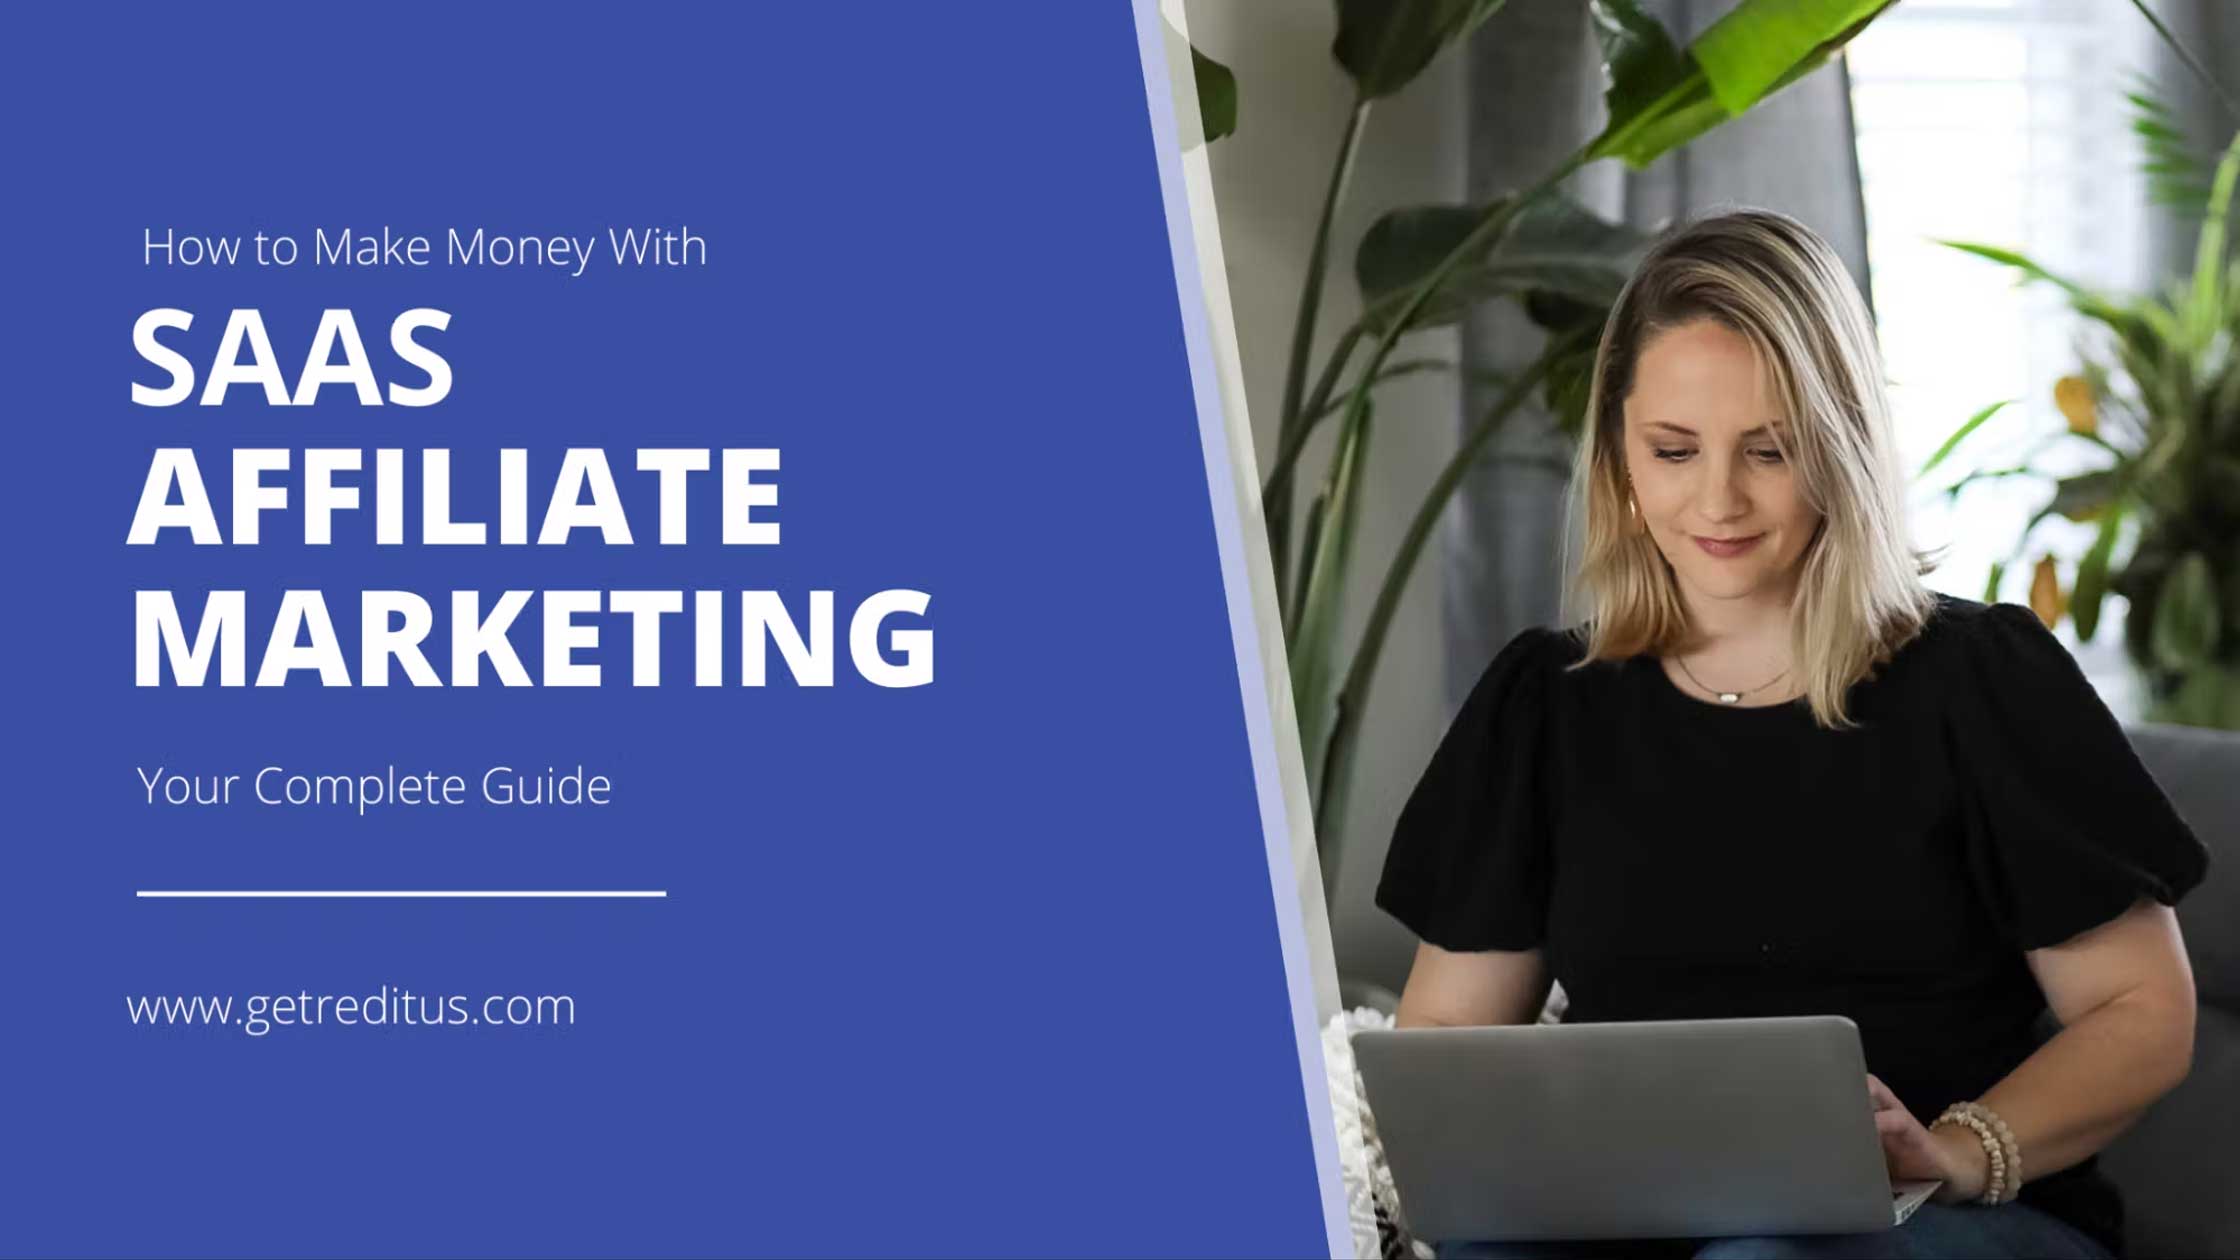 https://www.getreditus.com/blog/how-to-make-money-with-saas-affiliate-marketing-7-tips/